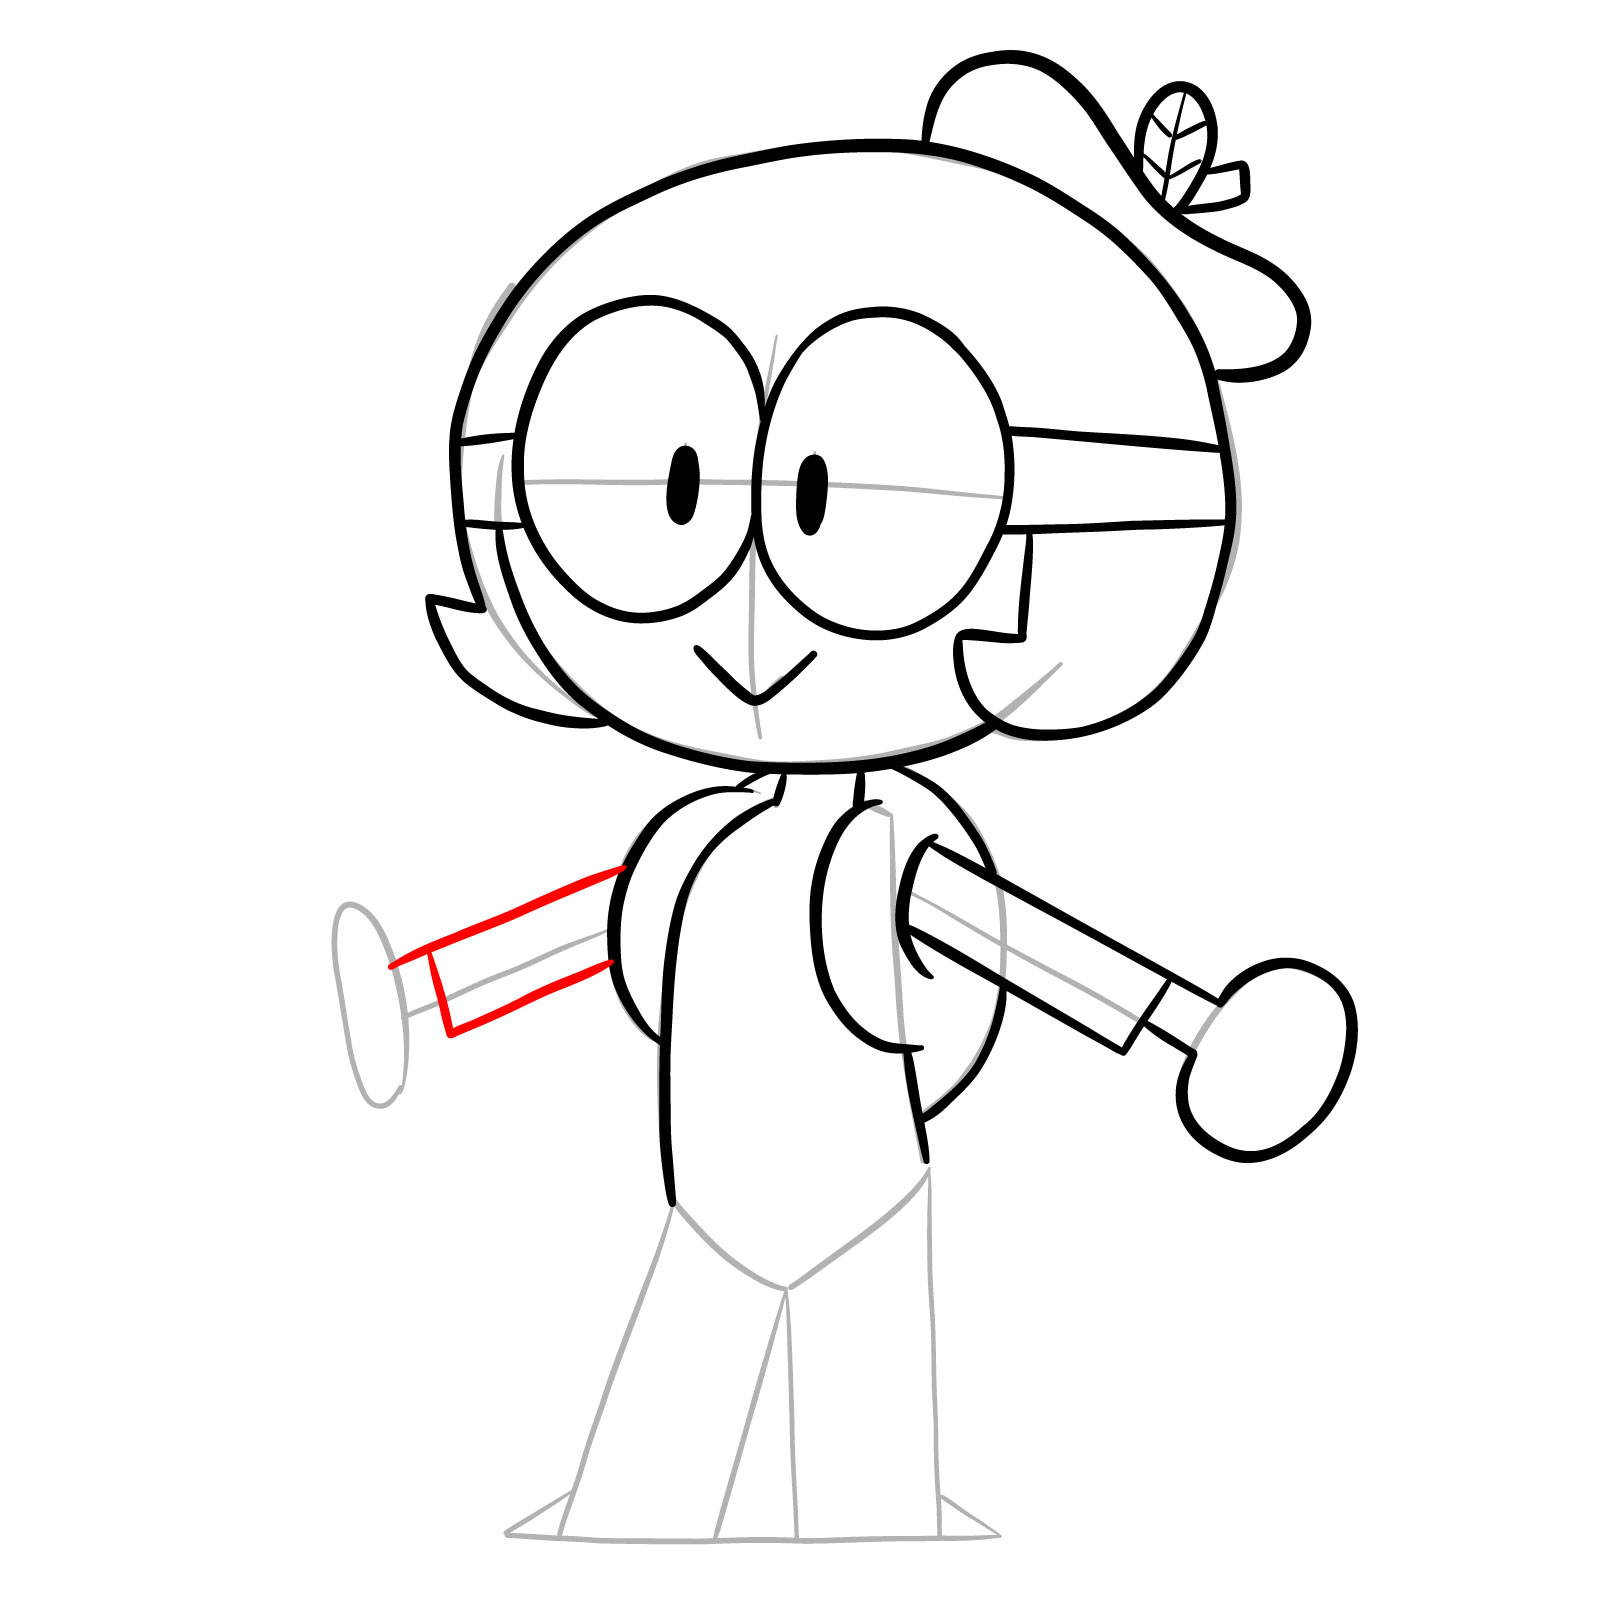 How to draw Dendy from OK K.O.! - step 16